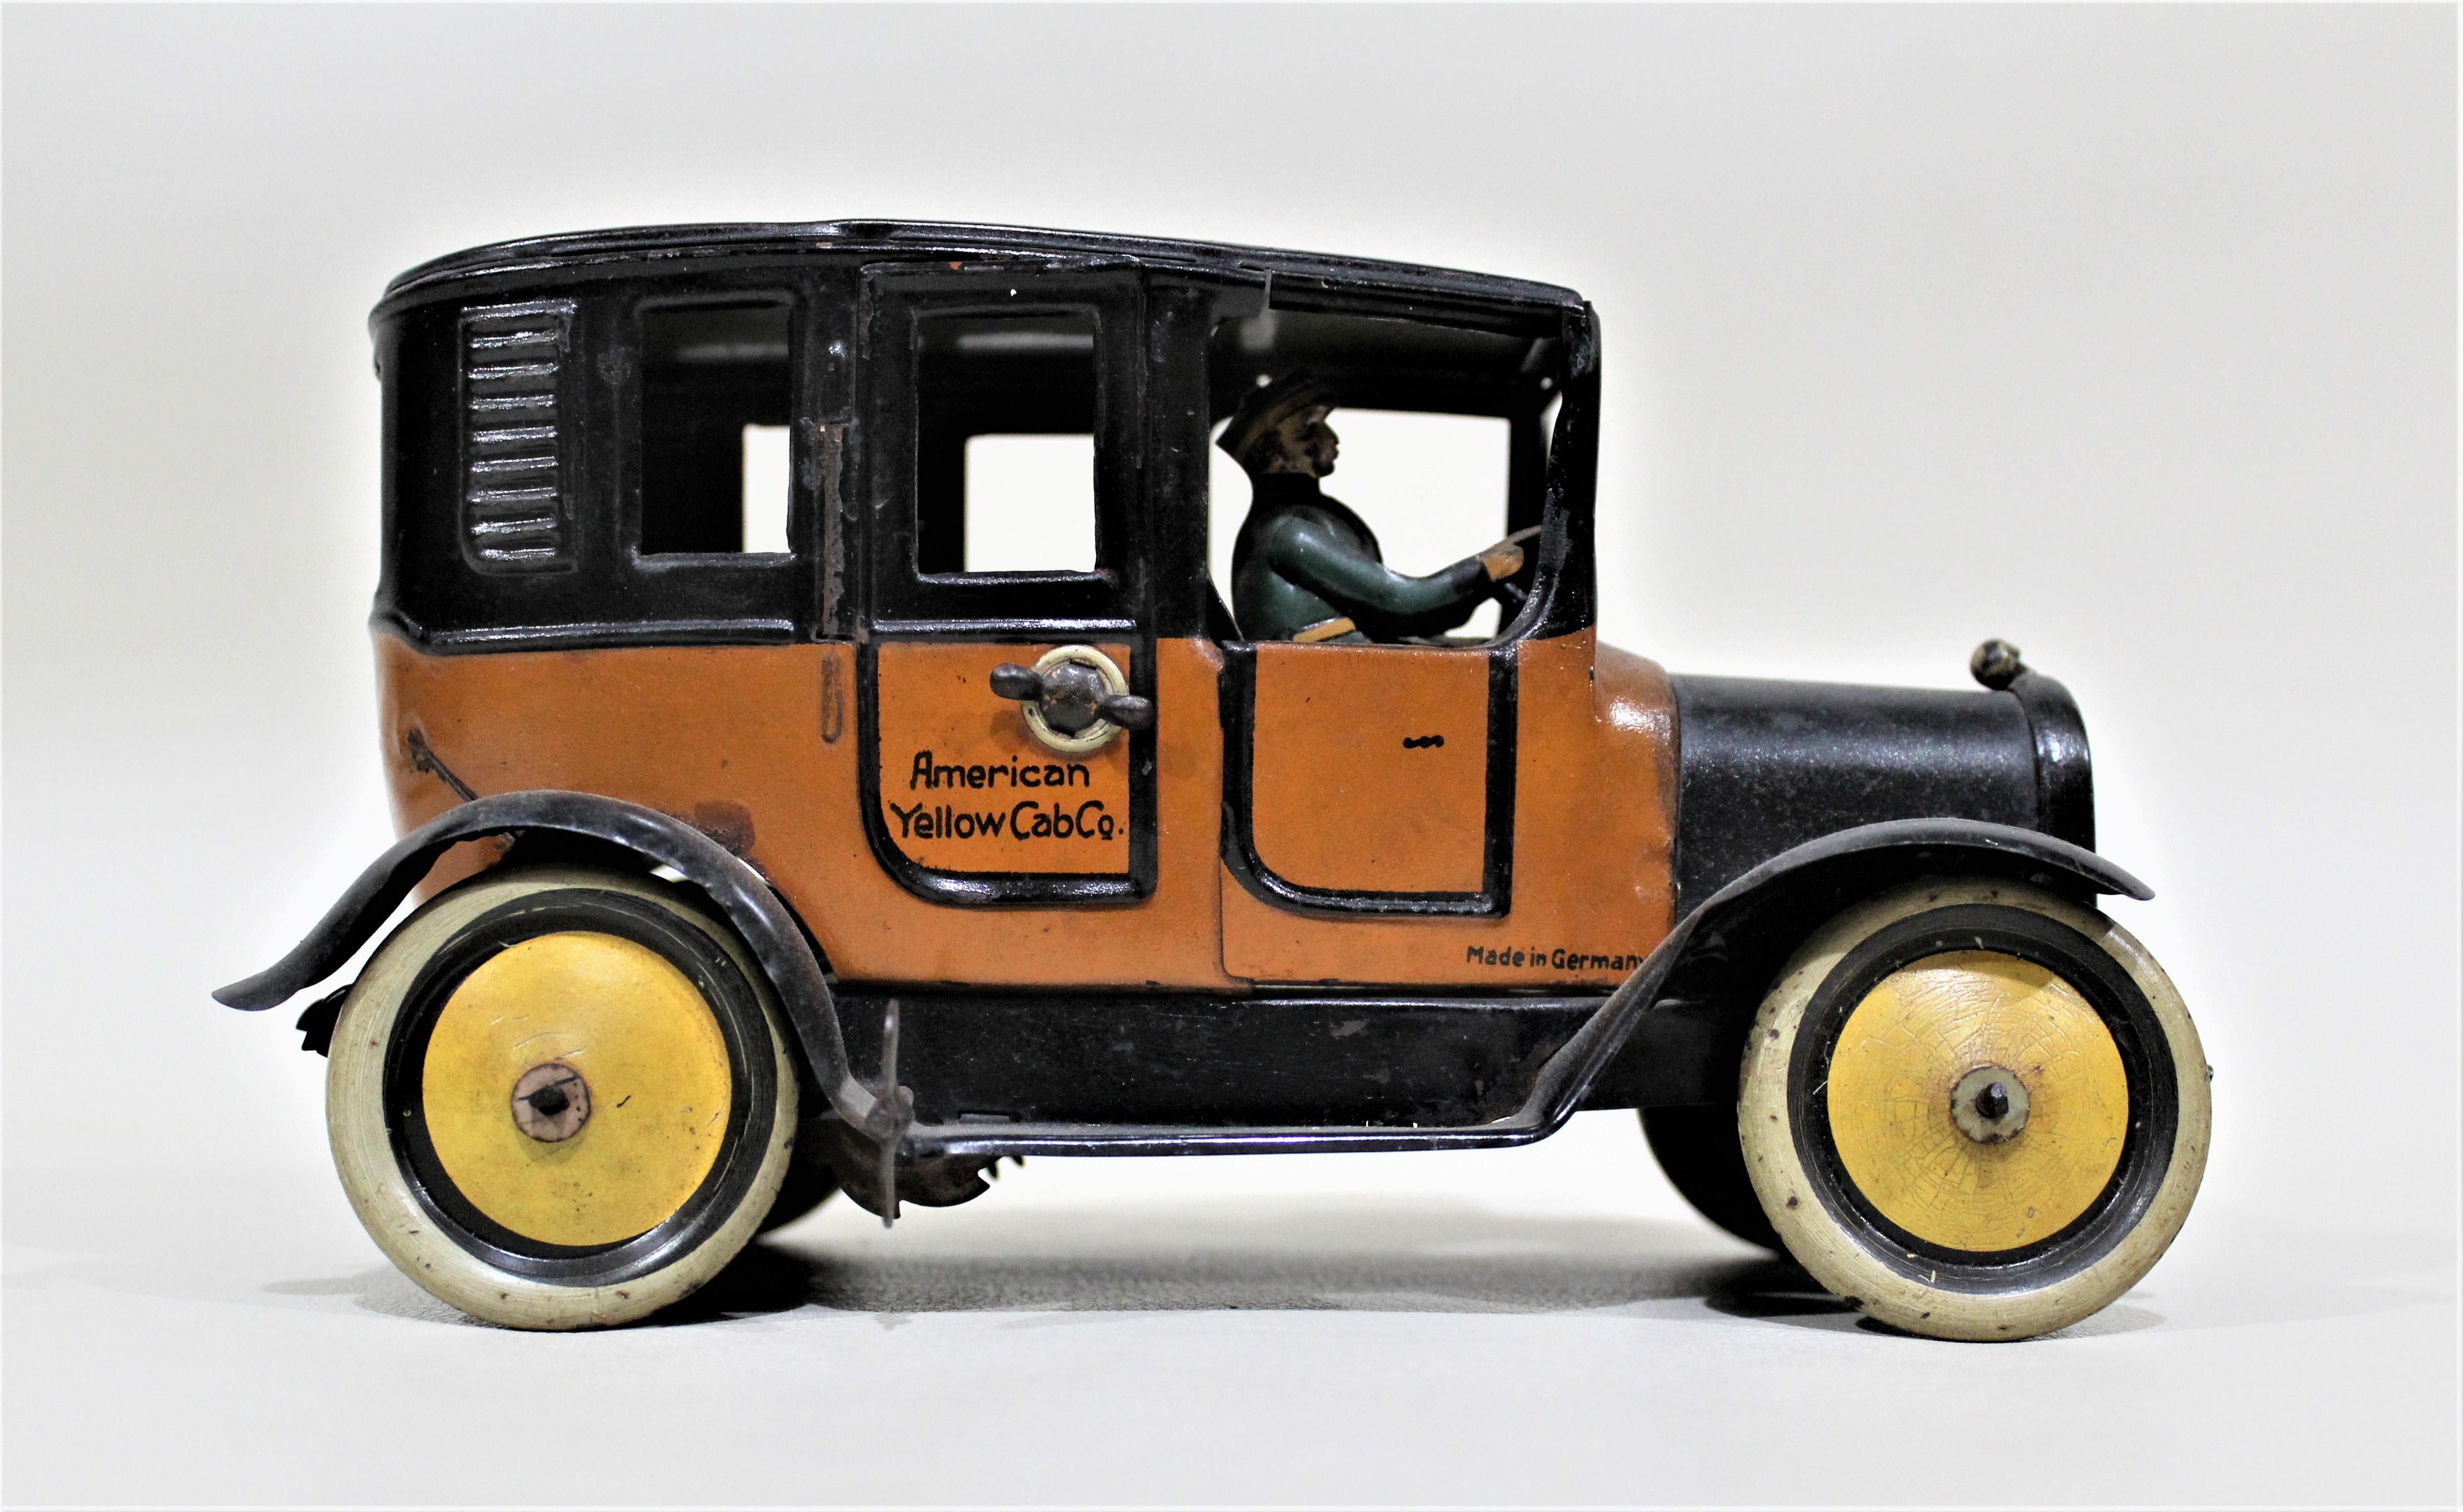 This tin toy 'Yellow Taxi' was most likely made by the German toy manufacturer, Greppert & Ketch during the 1930s. The toy is a period sedan complete with a driver, latching doors and tension spring style motor. This German tin toy is in nice period